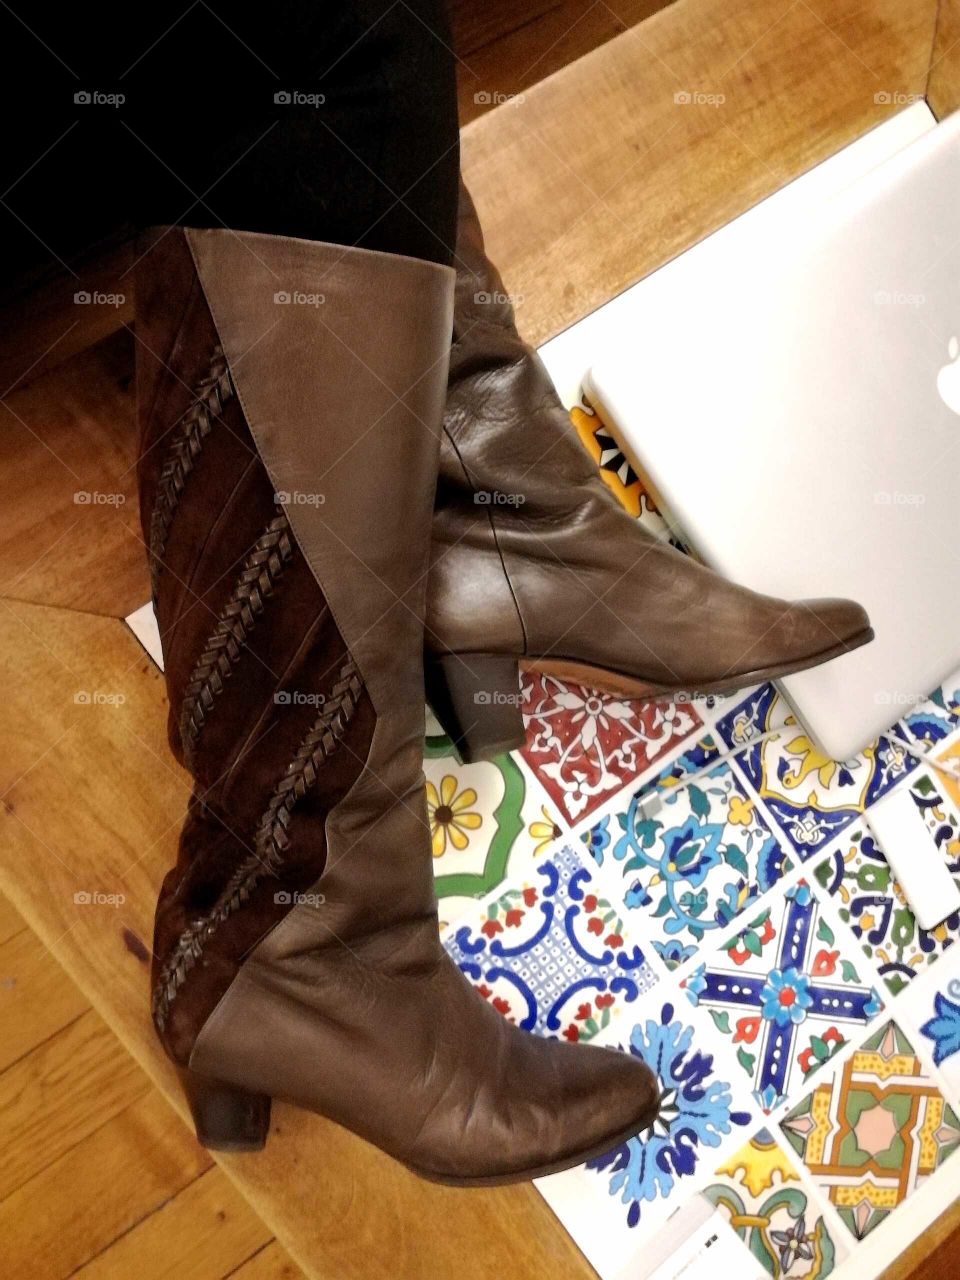 vintage boots on the table